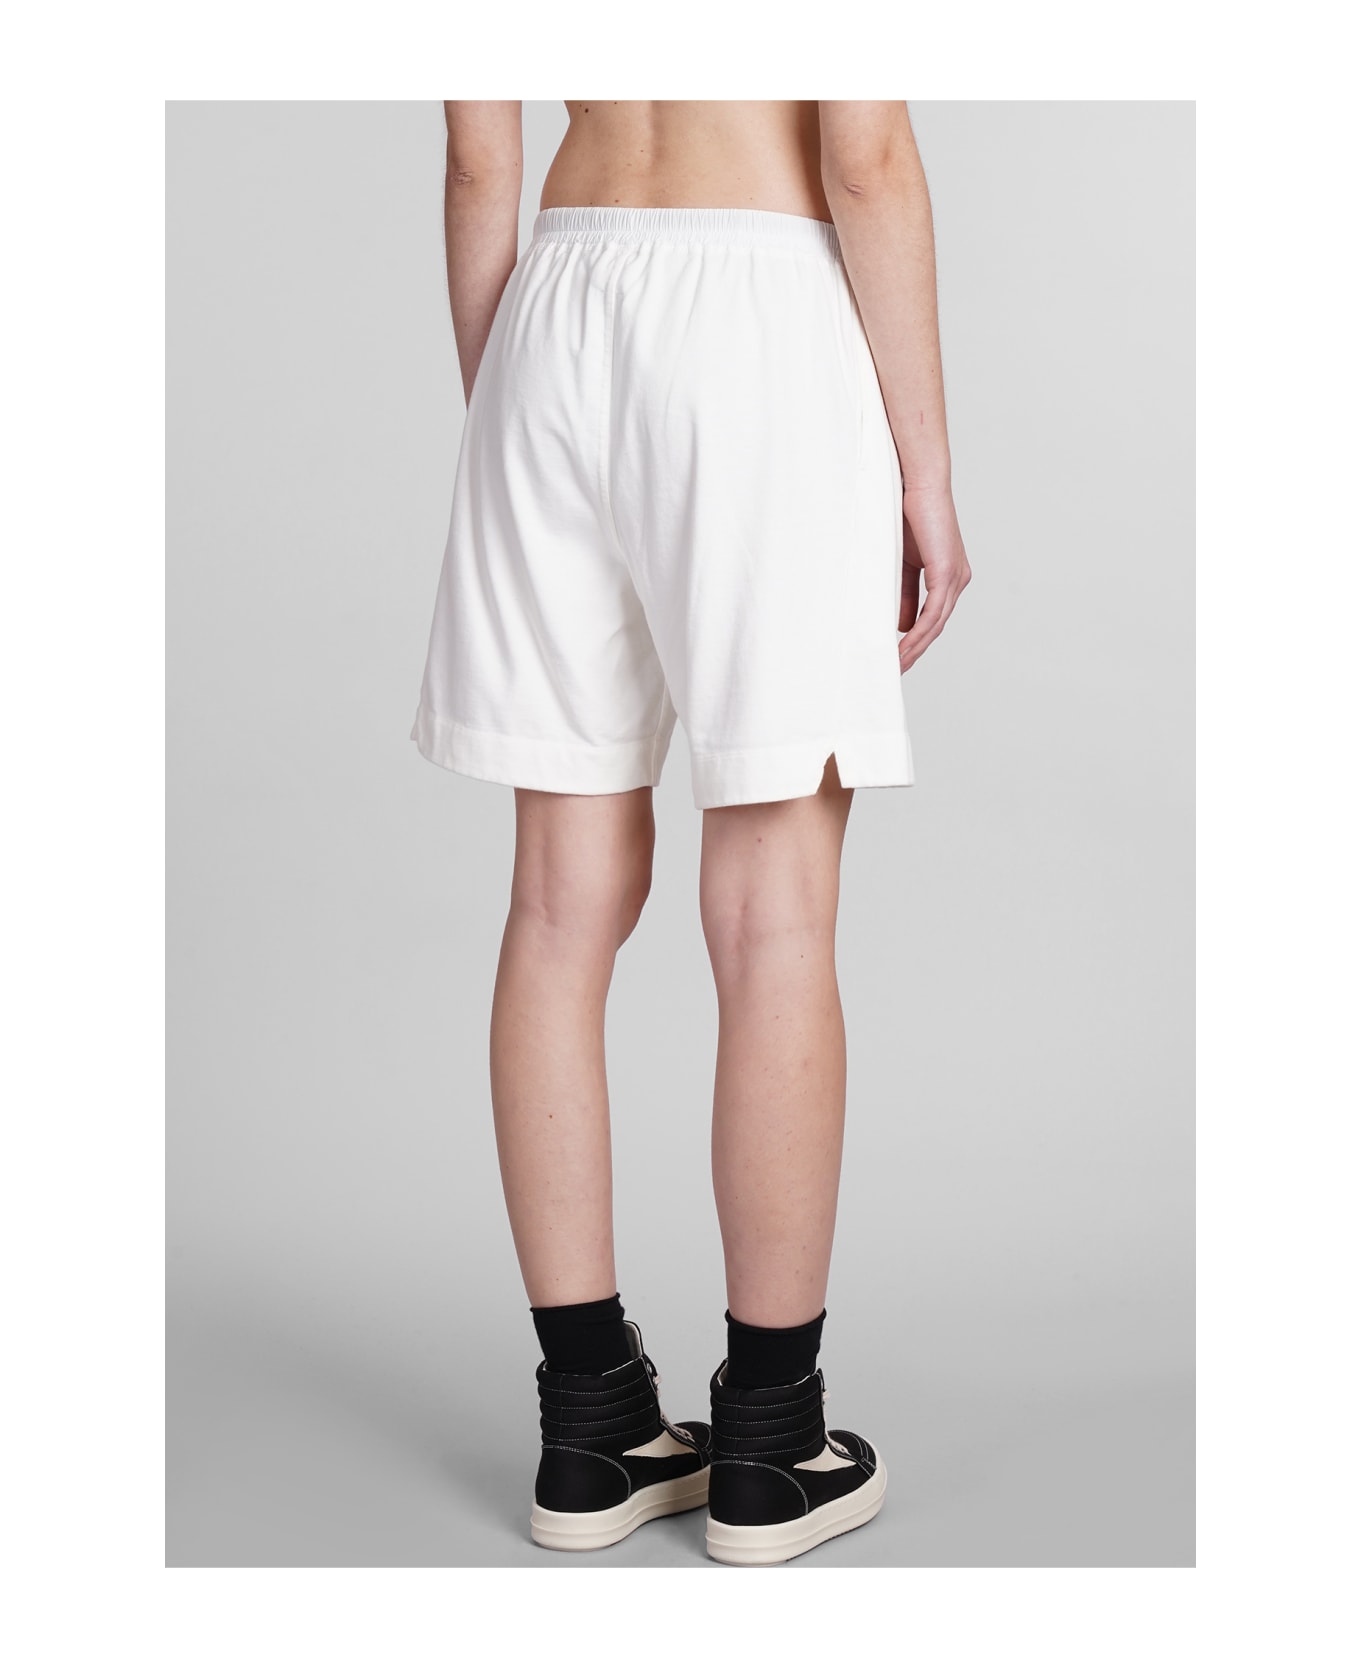 DRKSHDW Boxers Shorts In White Cotton - white